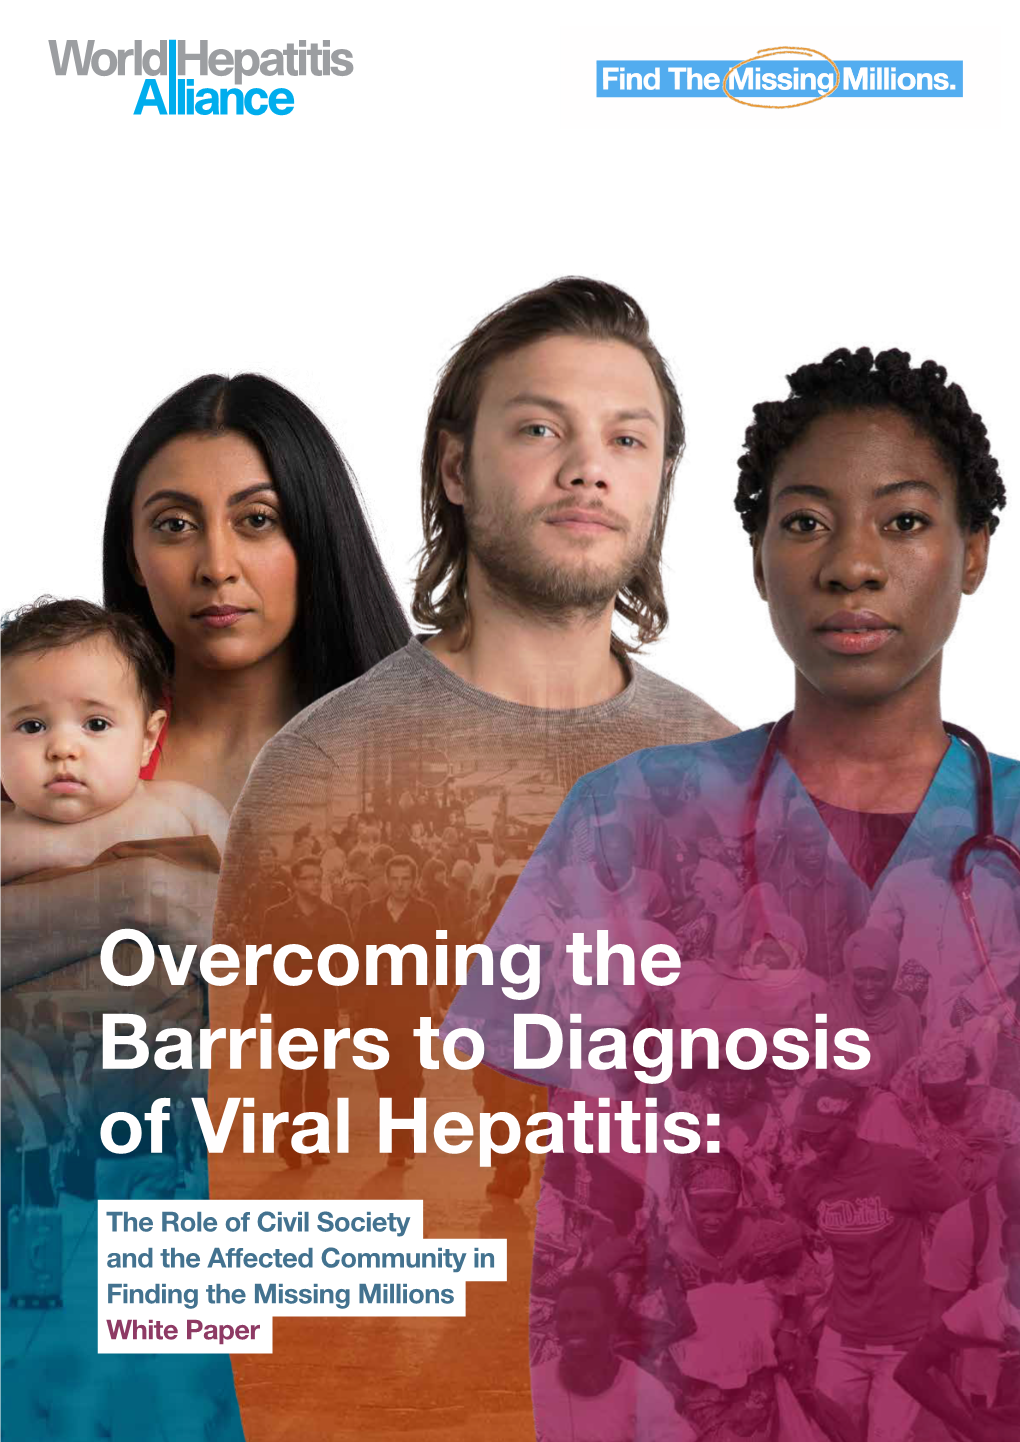 Overcoming the Barriers to Diagnosis of Viral Hepatitis: the Role of Civil Society and the Affected Community in Finding the Missing Millions White Paper CONTENTS